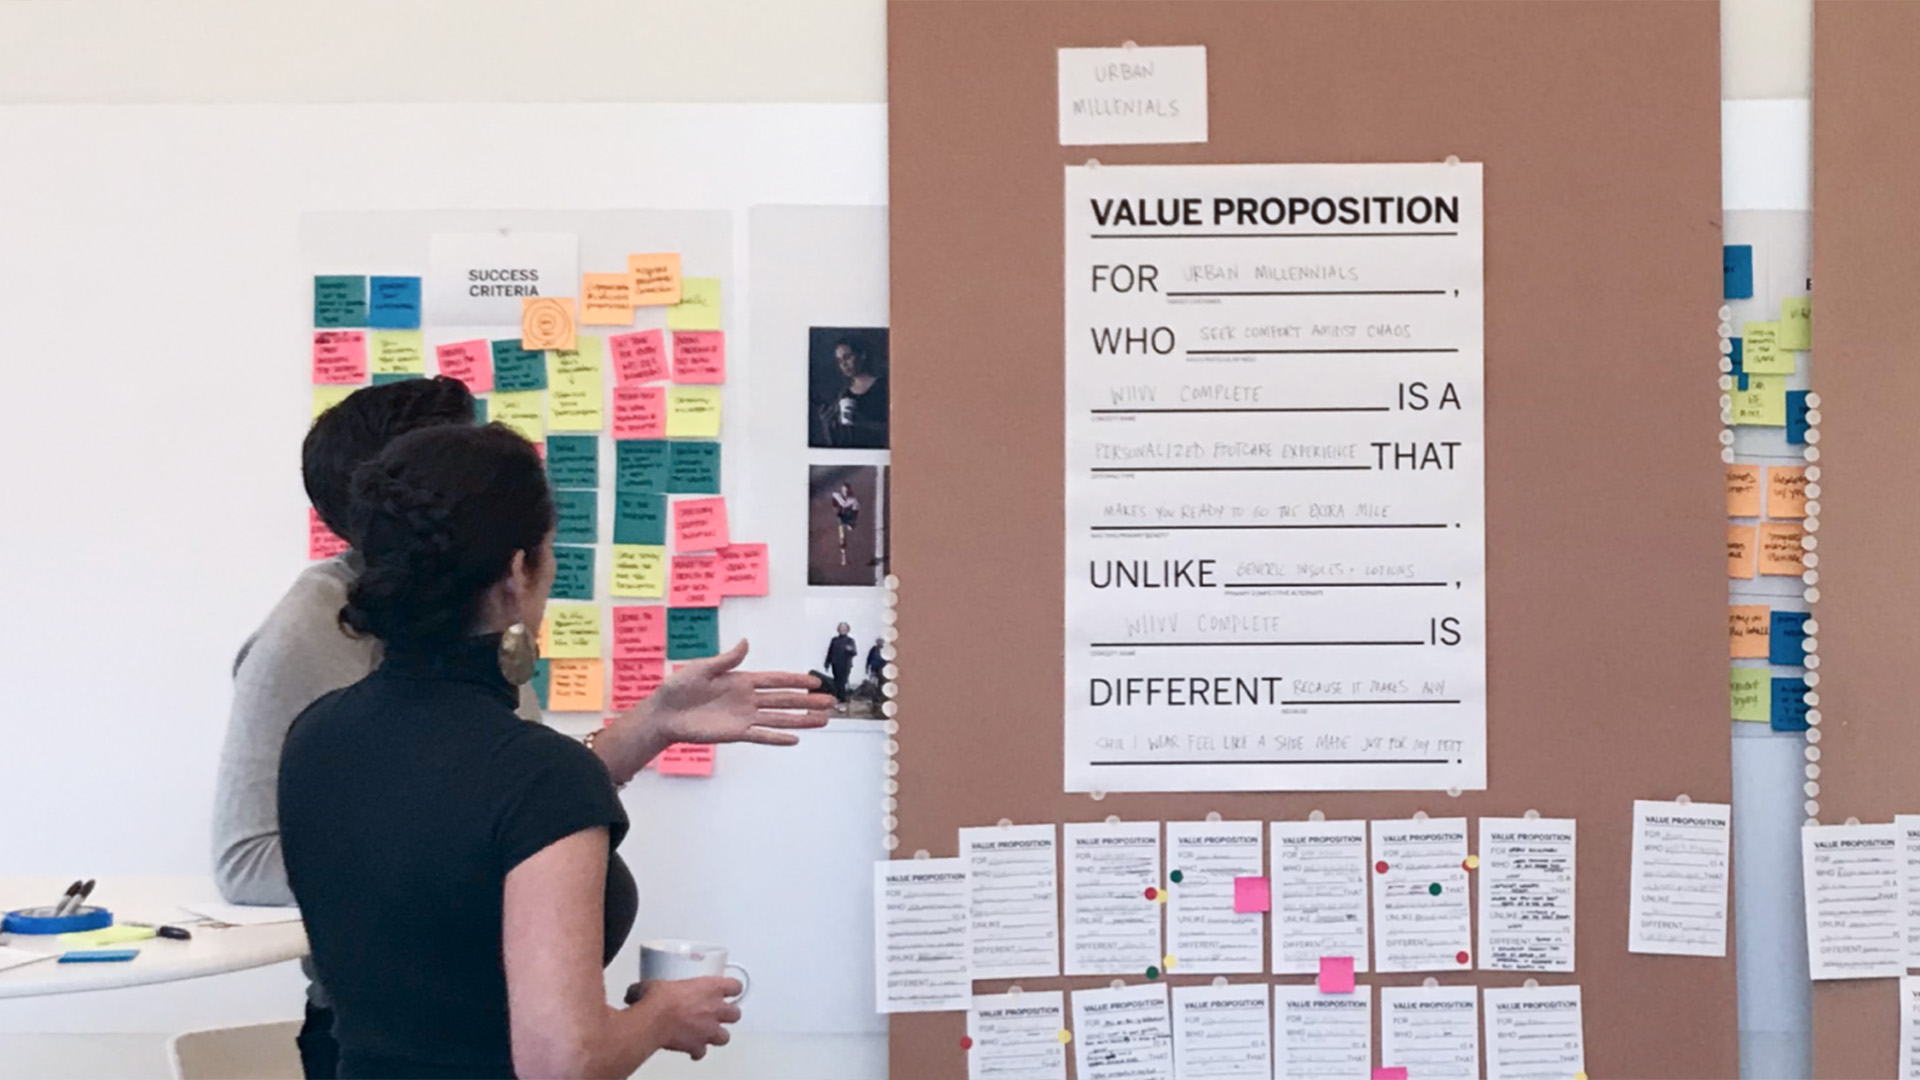 Two IA Collaborative designers standing in front of a wall of written notes, looking at large poster entitled "Value Proposition".